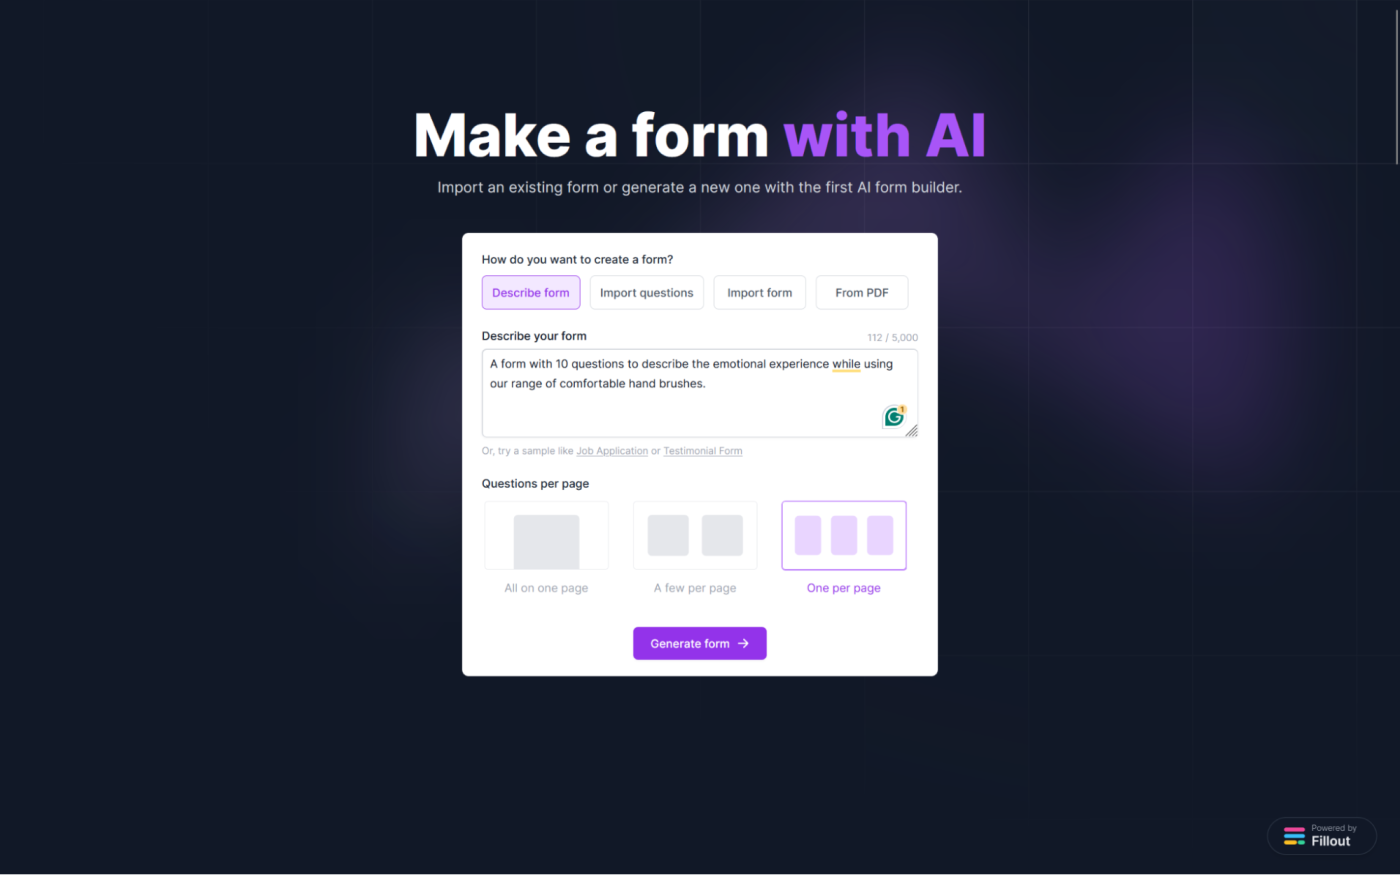 Fillout, our pick for the best form software for building a form with AI